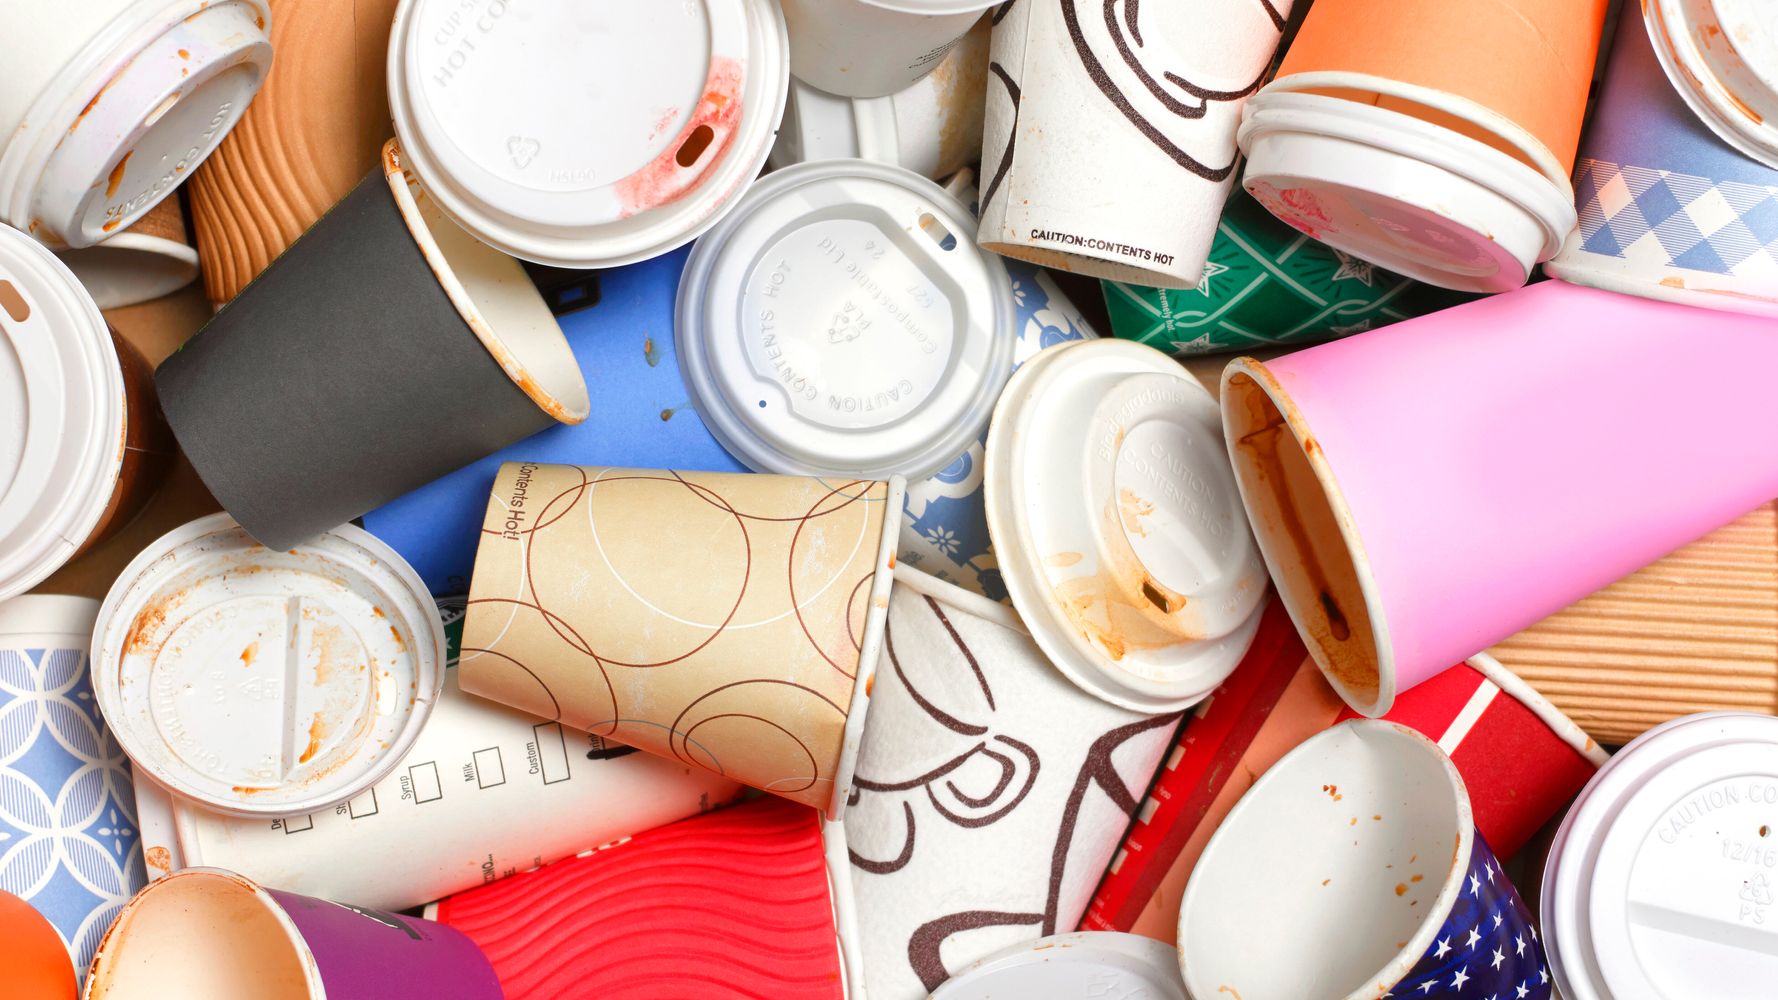 Paper cups are just as toxic as plastic cups